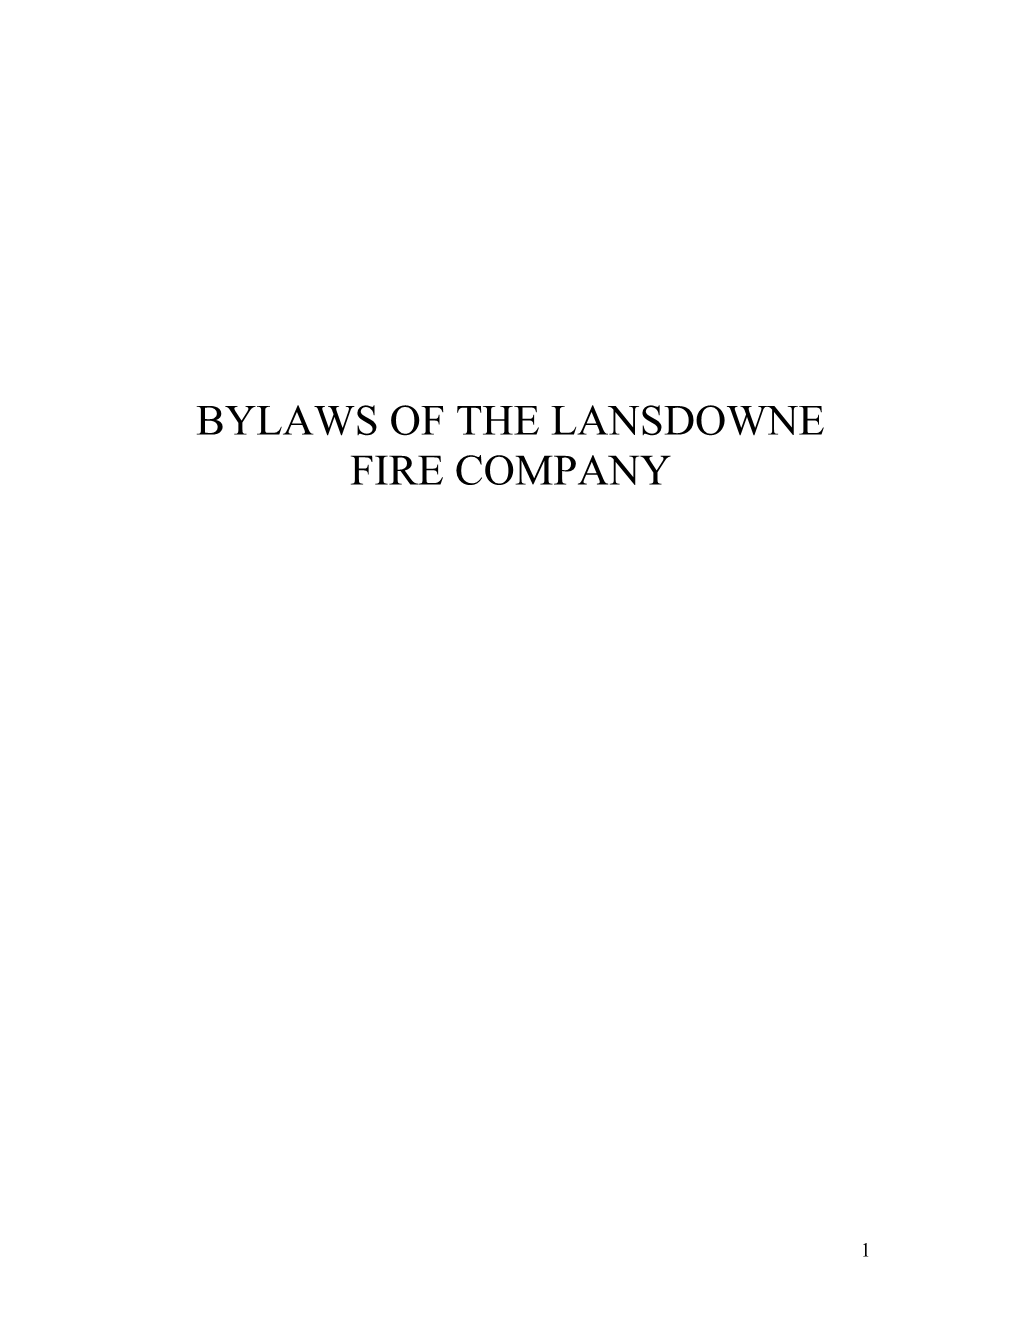 Bylaws of the Lansdowne Fire Company